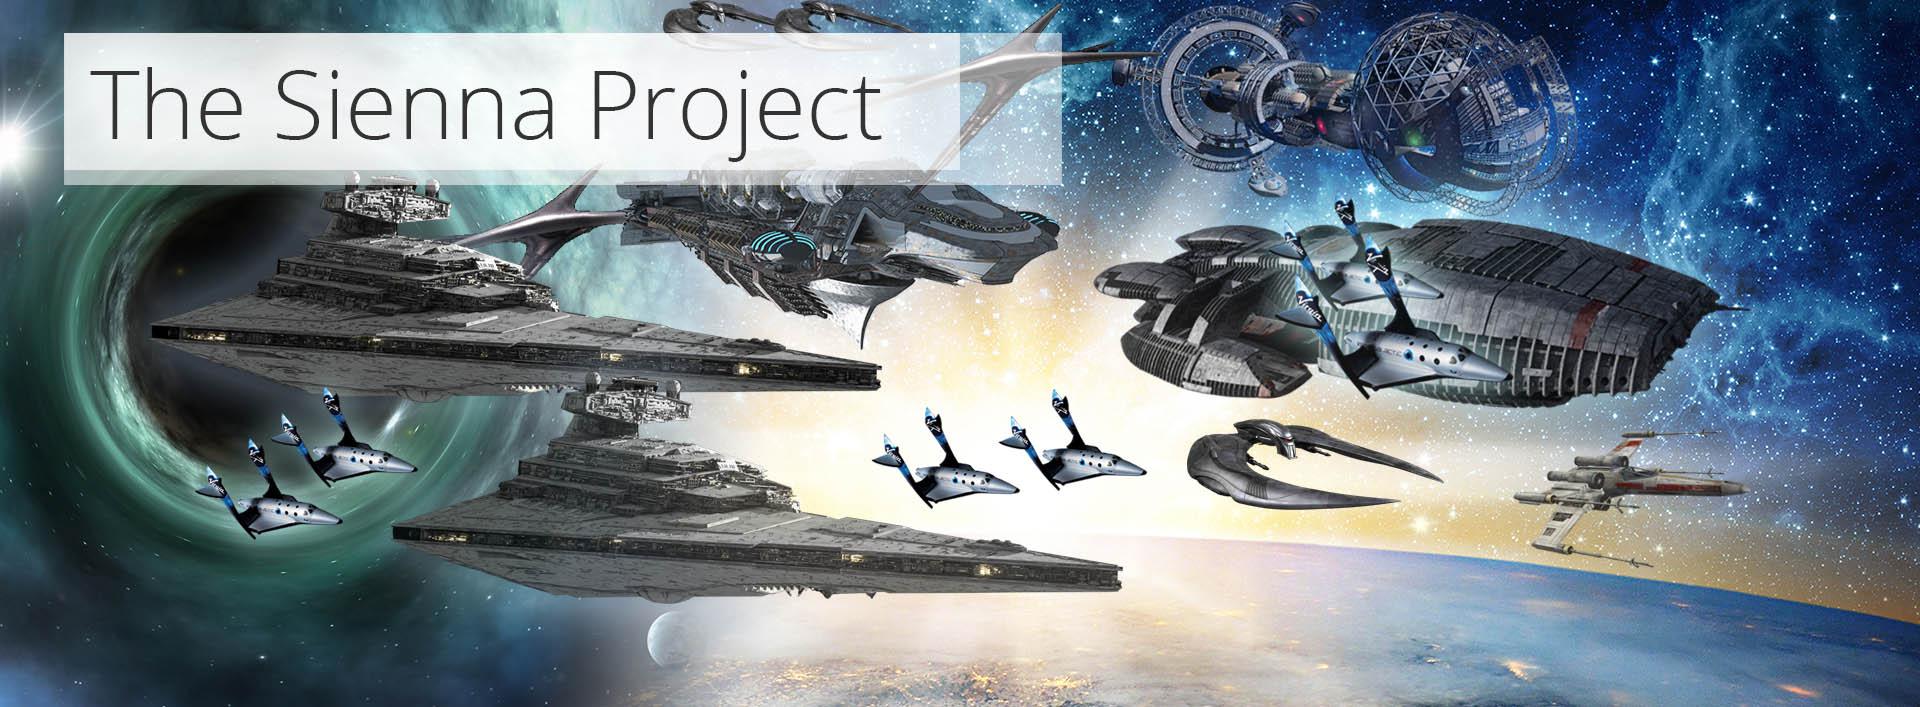 The Sienna Project